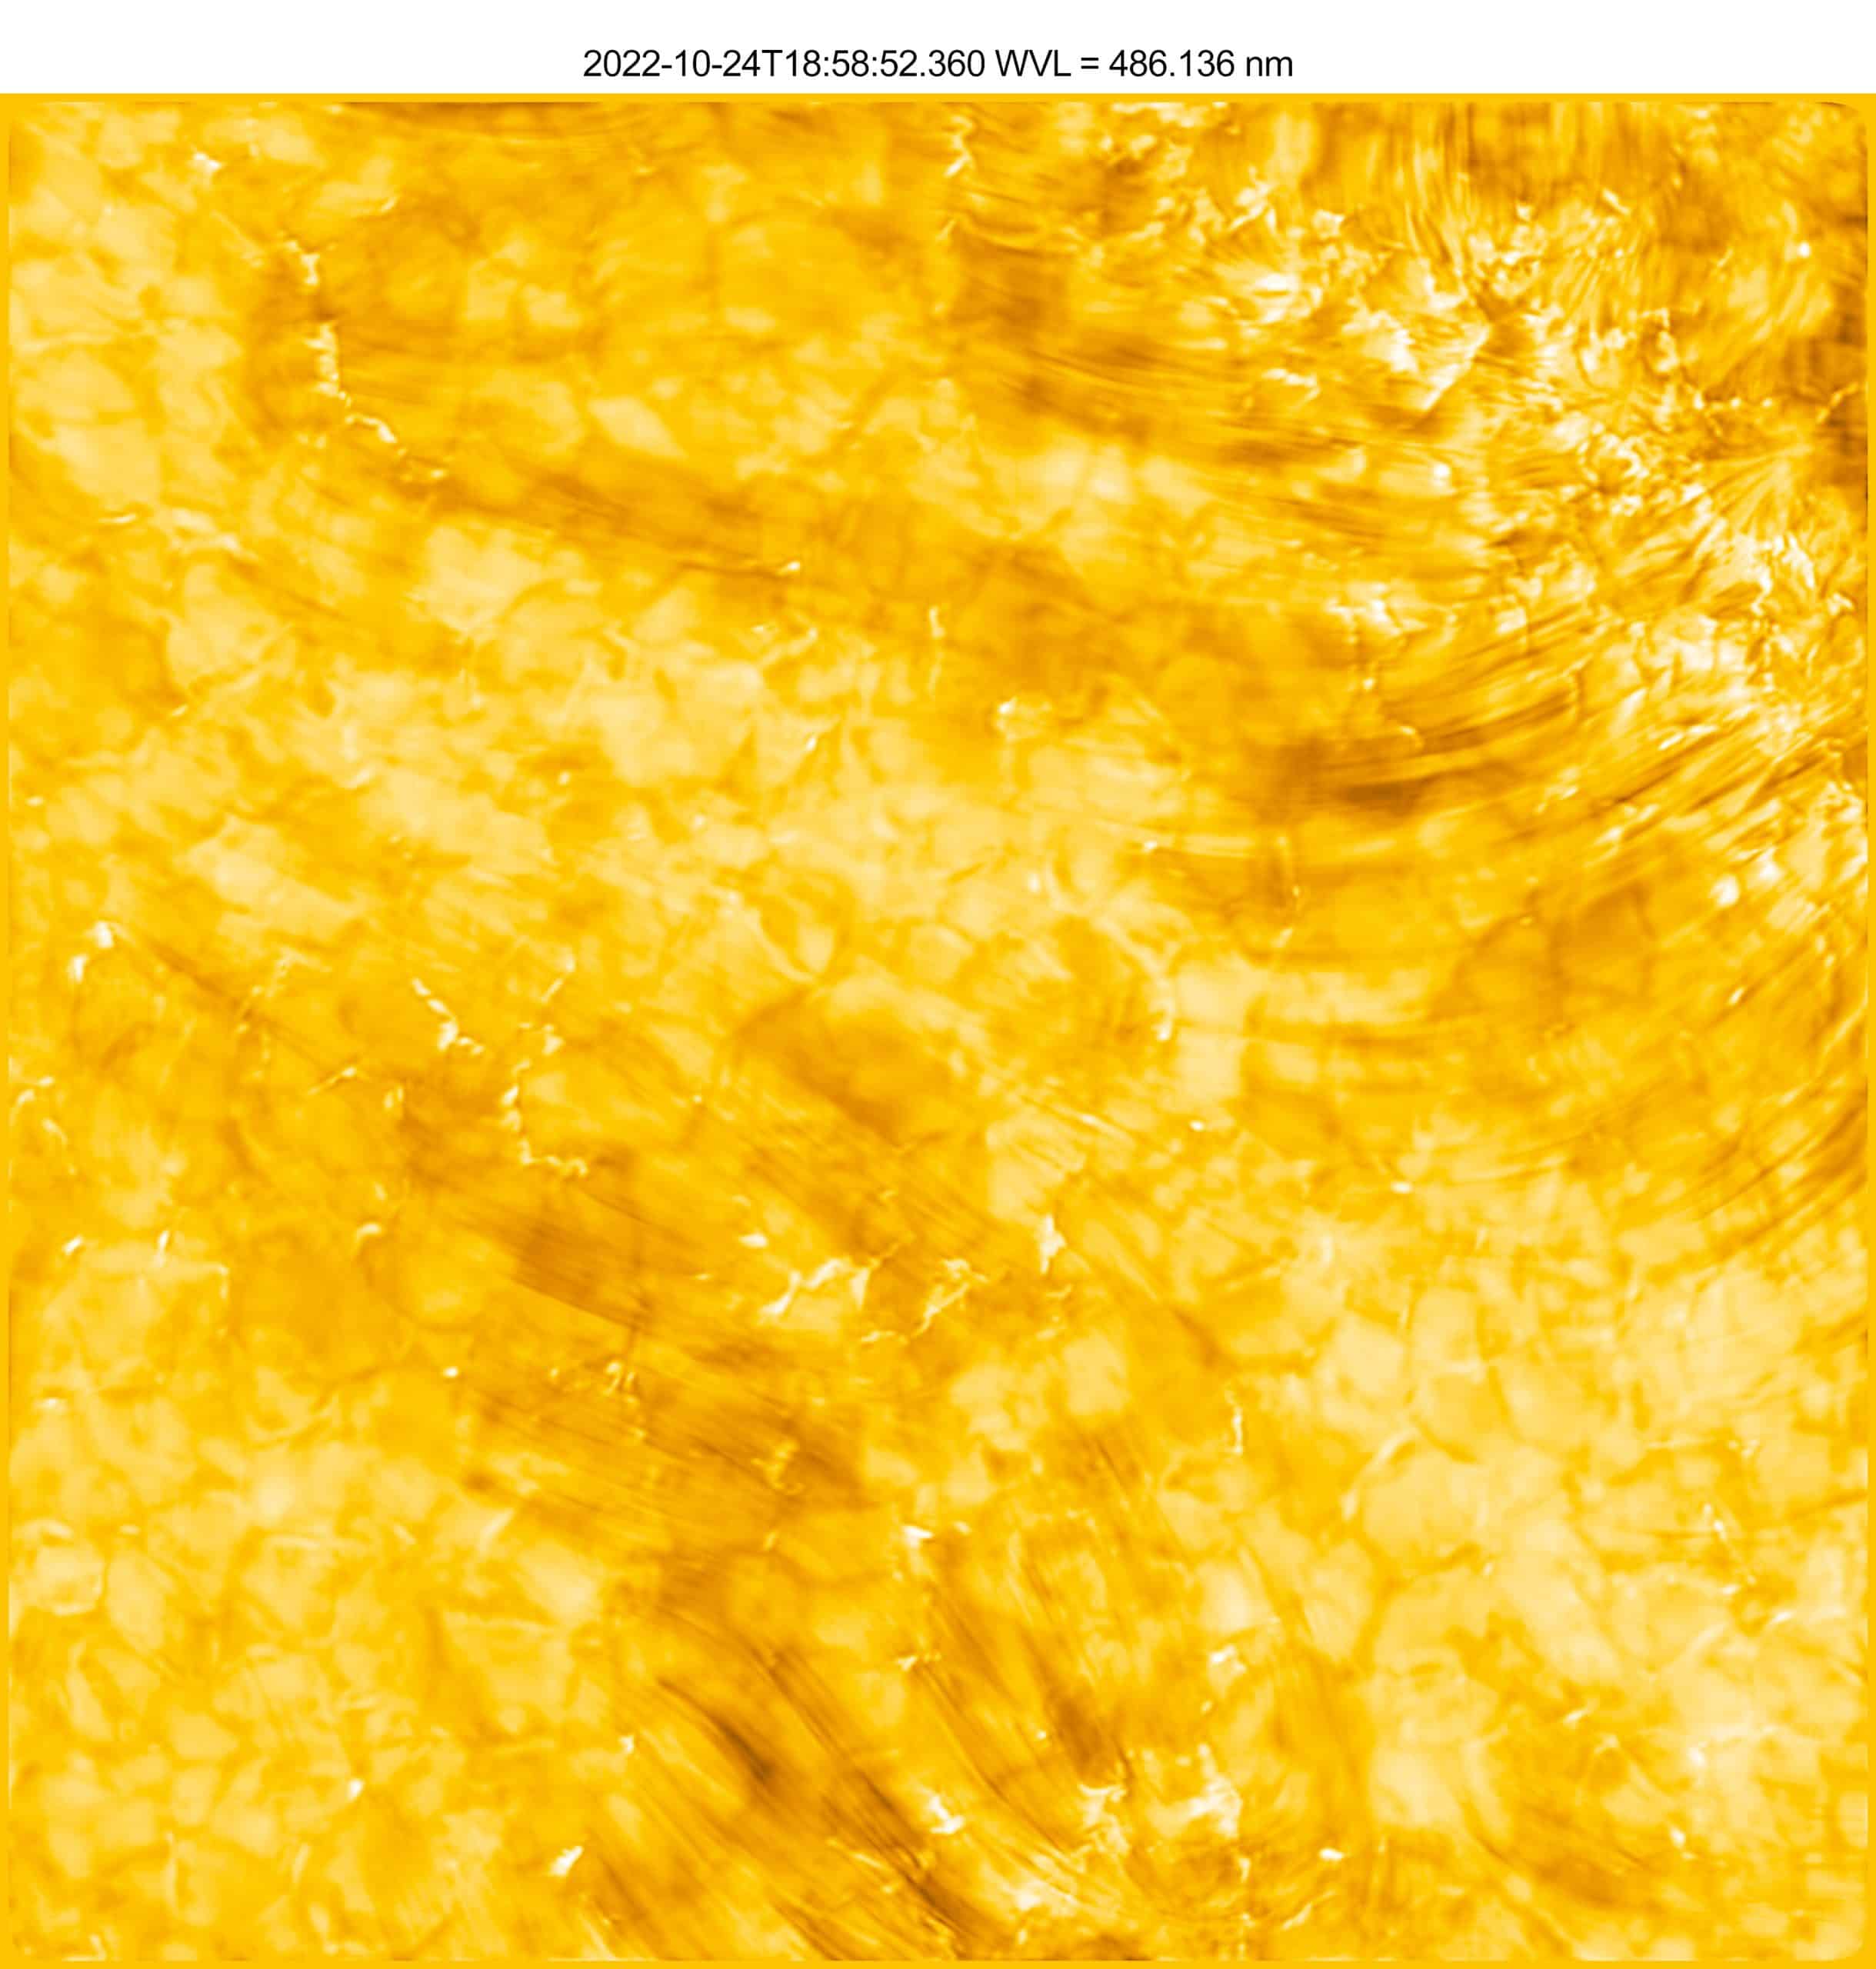 This image, taken by Inouye Solar Telescope in coordination with the ESA’s Solar Orbiter, reveals the fibrillar nature of the solar atmosphere. In the atmosphere, or chromosphere, fine, dark threads of plasma (fibril) are visible emanating from the magnetic network below. The outline of bright structures are signature of the presence of magnetic fields. Image Title: The Fibrillar Nature of the Solar Atmosphere PID: PID_1_123 Large Field of View: 30,720km x 30,720km Image Credit: NSF/AURA/NSO Image Processing: Friedrich Wöger(NSO), Catherine Fischer (NSO) Science Credit: Public DDT Data